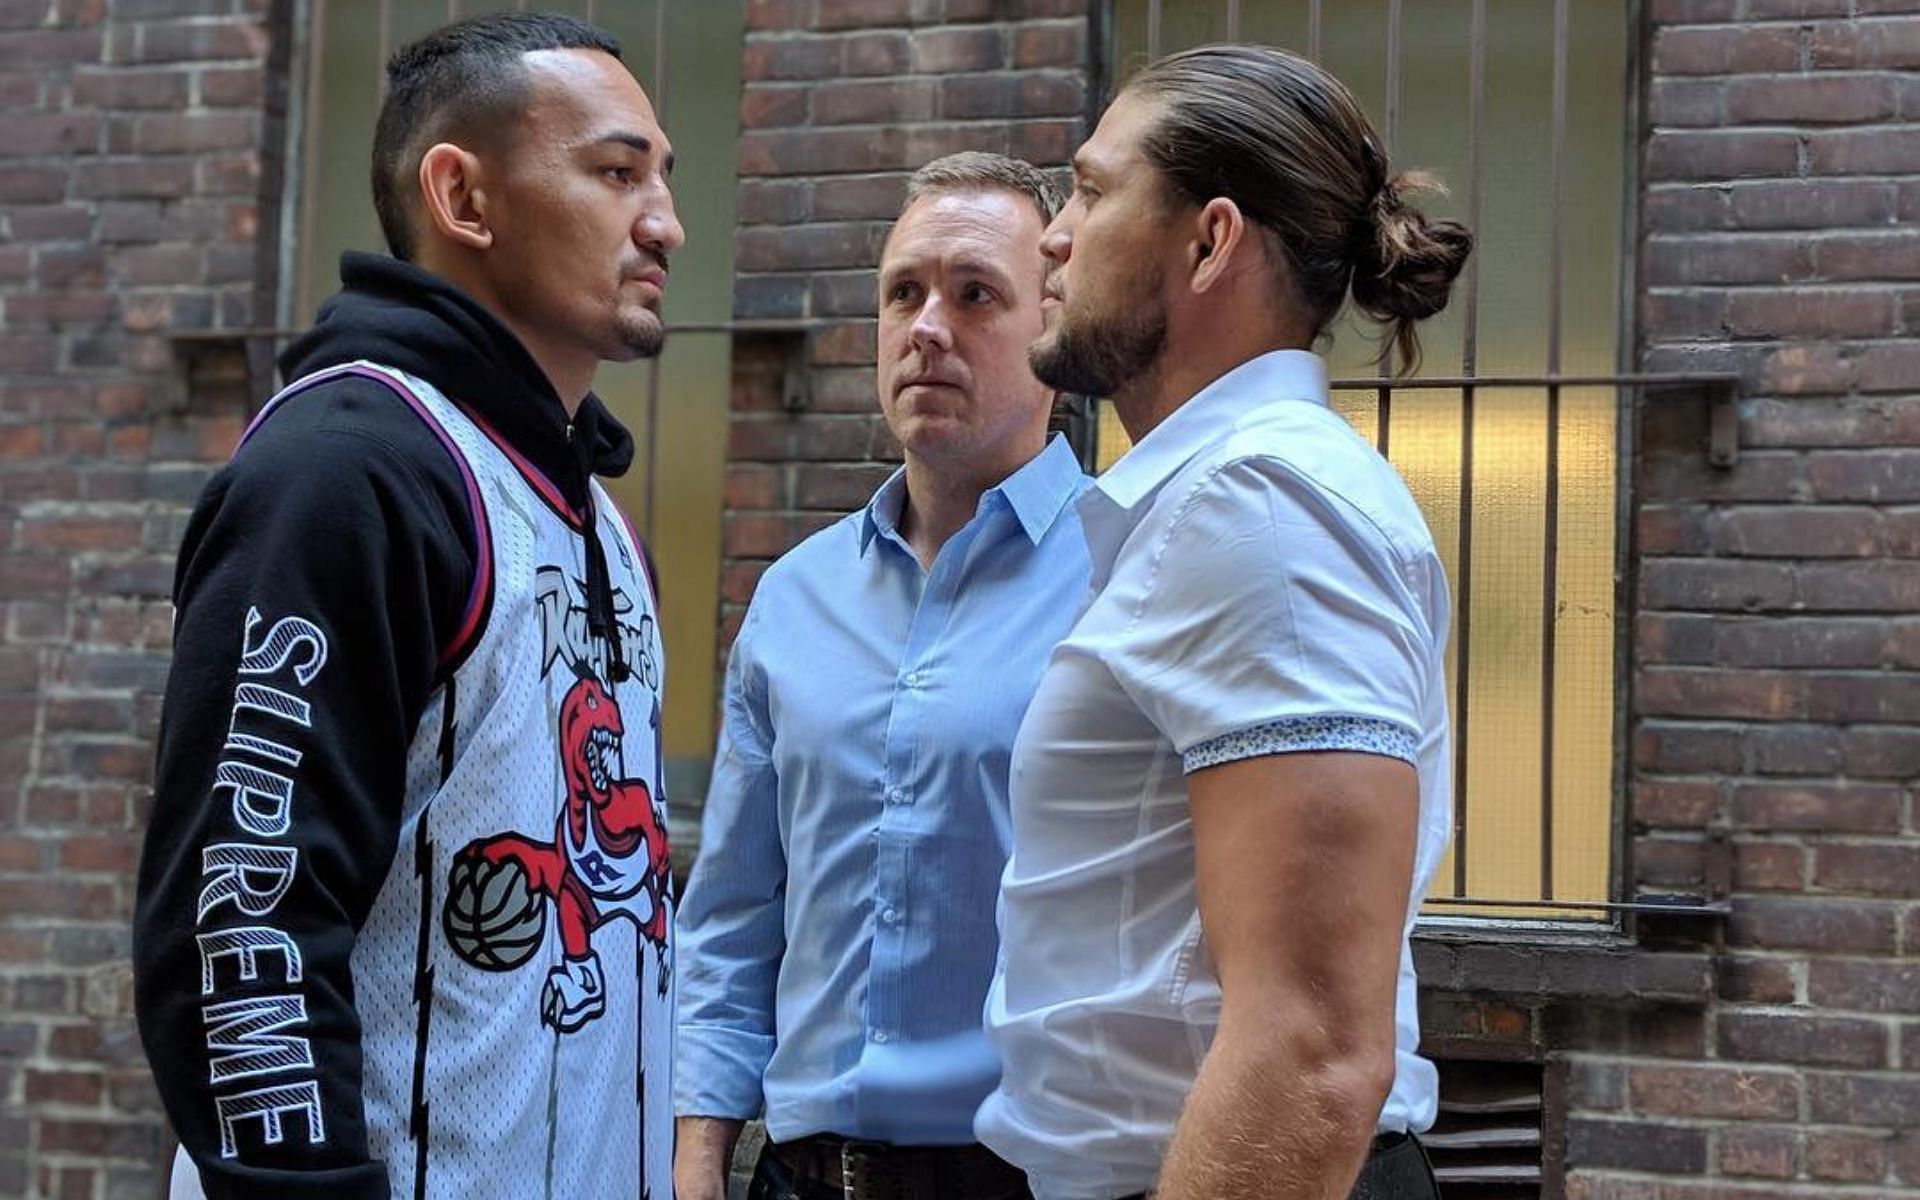 Watch: When Max Holloway tried to teach Brian Ortega how to block mid-fight during their epic UFC 231 battle